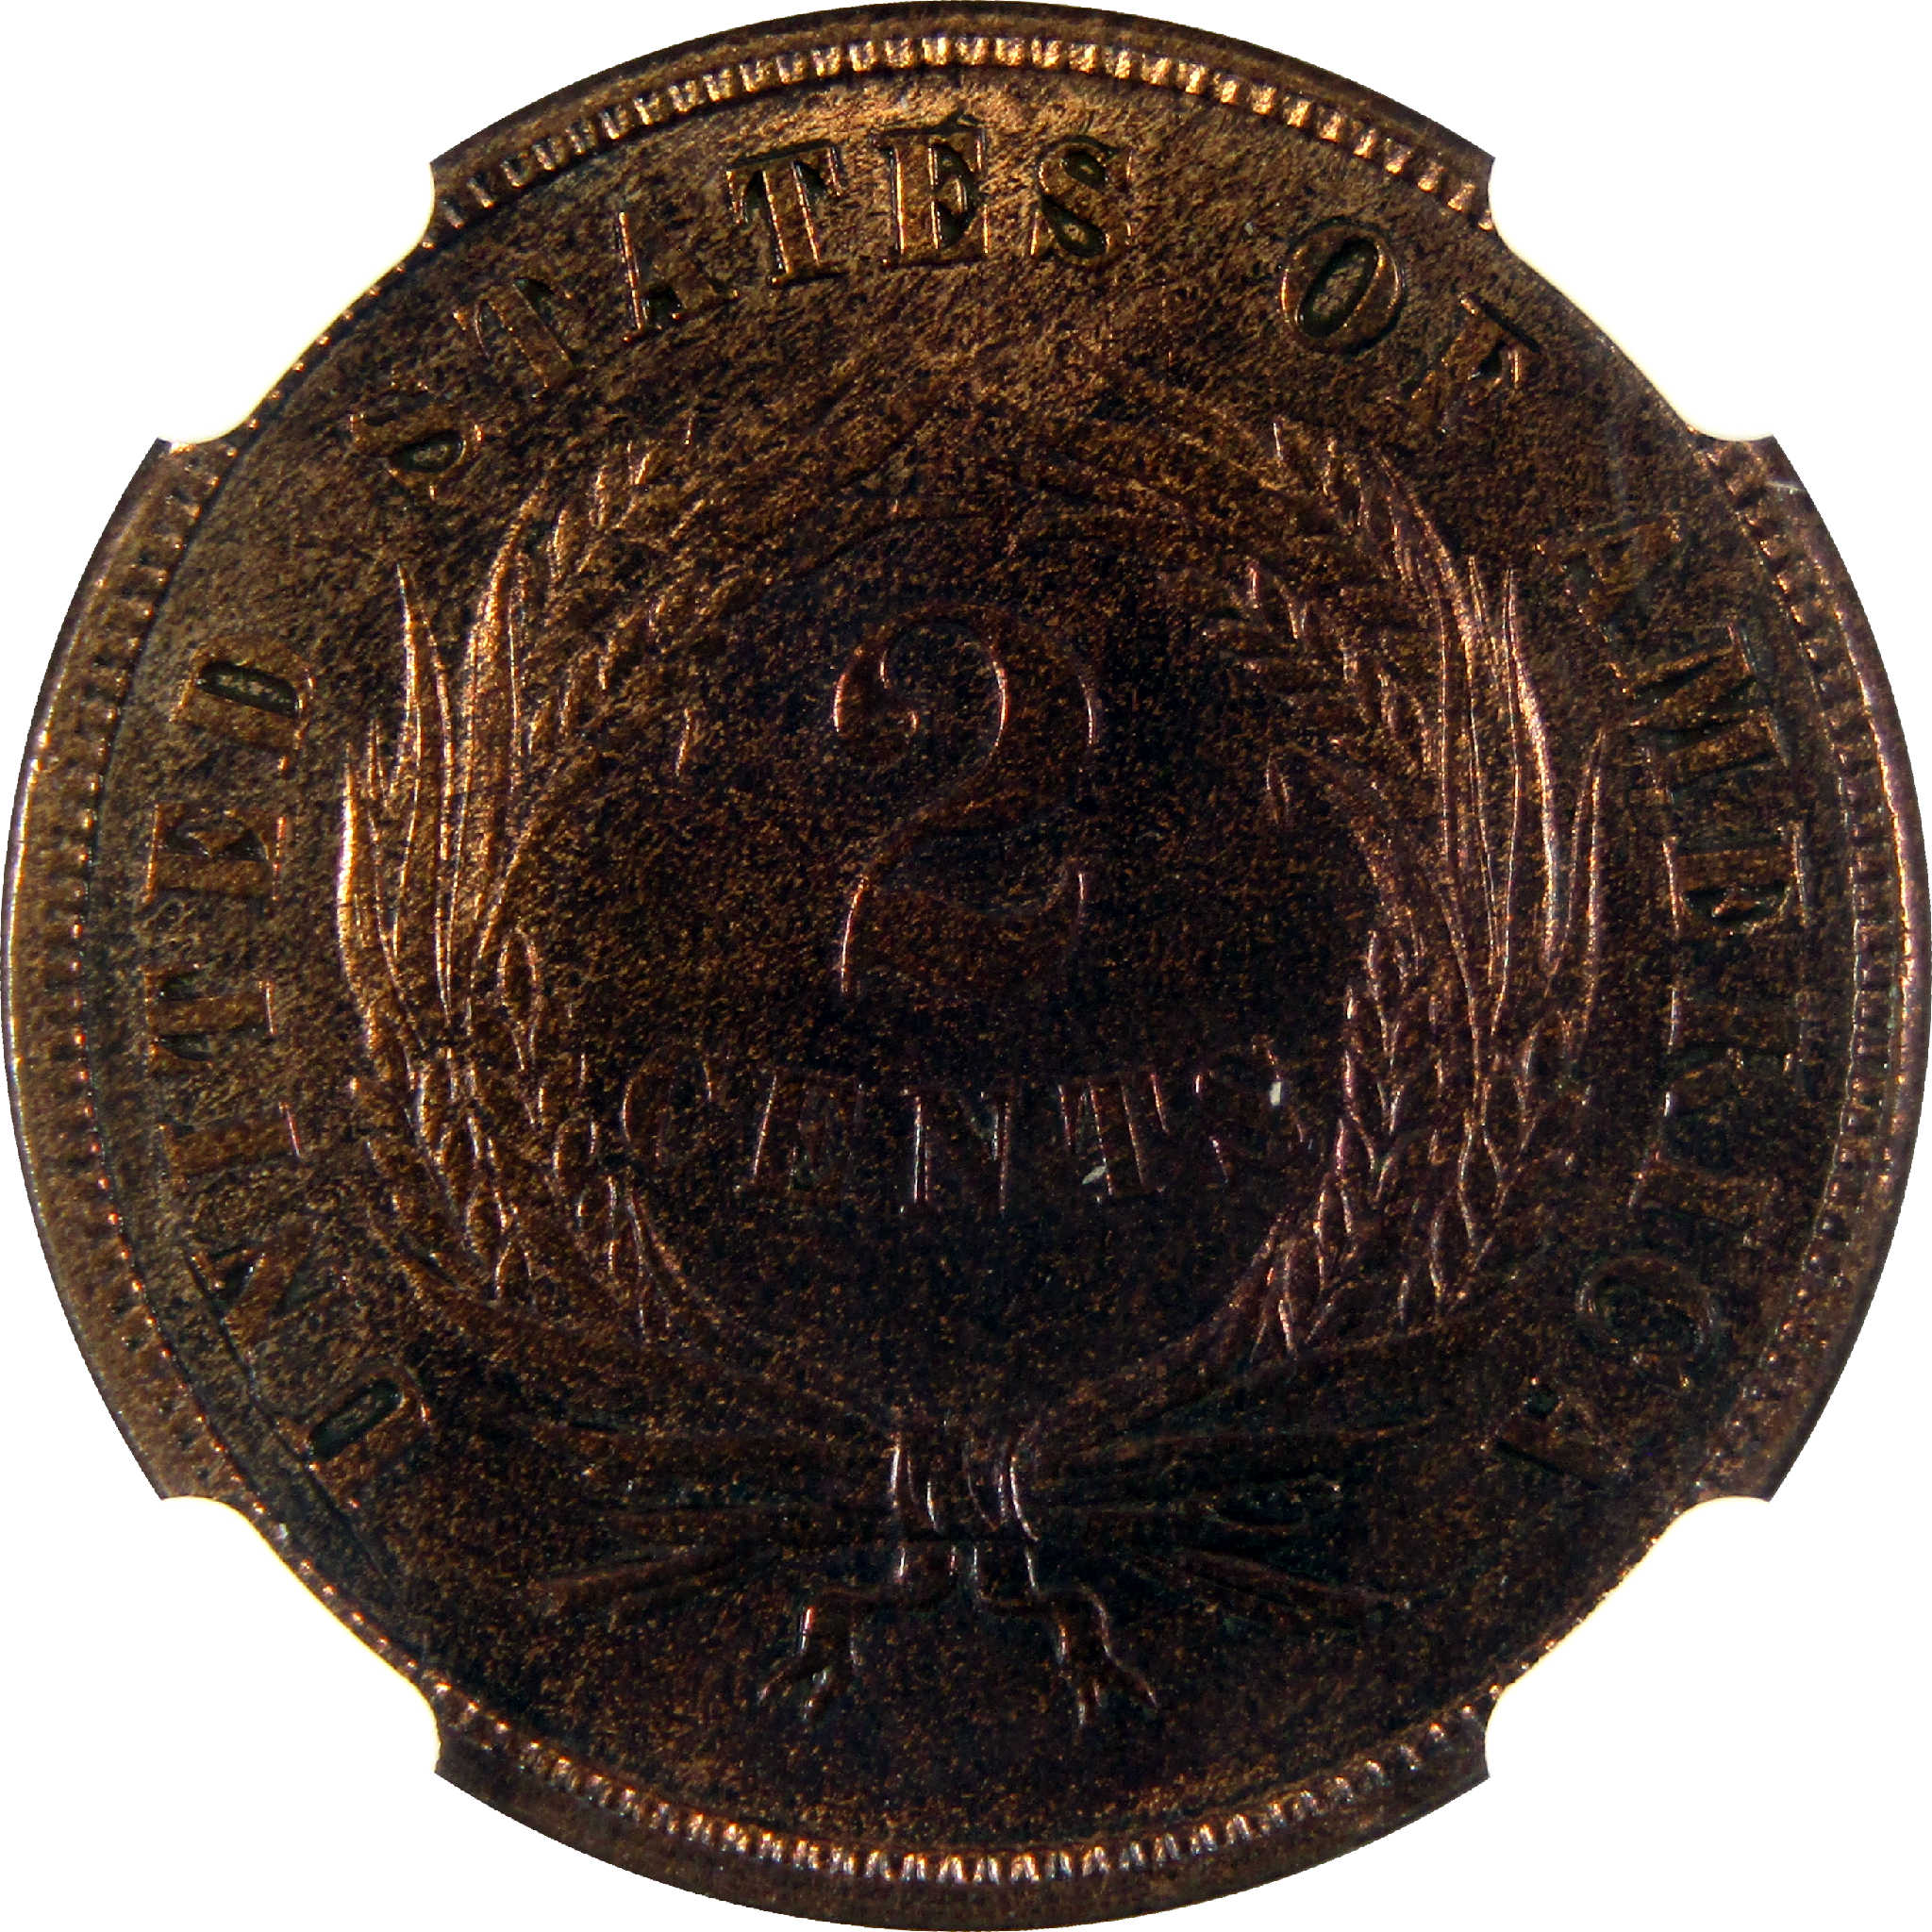 1872 Two Cent Piece Uncirculated Details NGC 2c Coin SKU:CPC6381